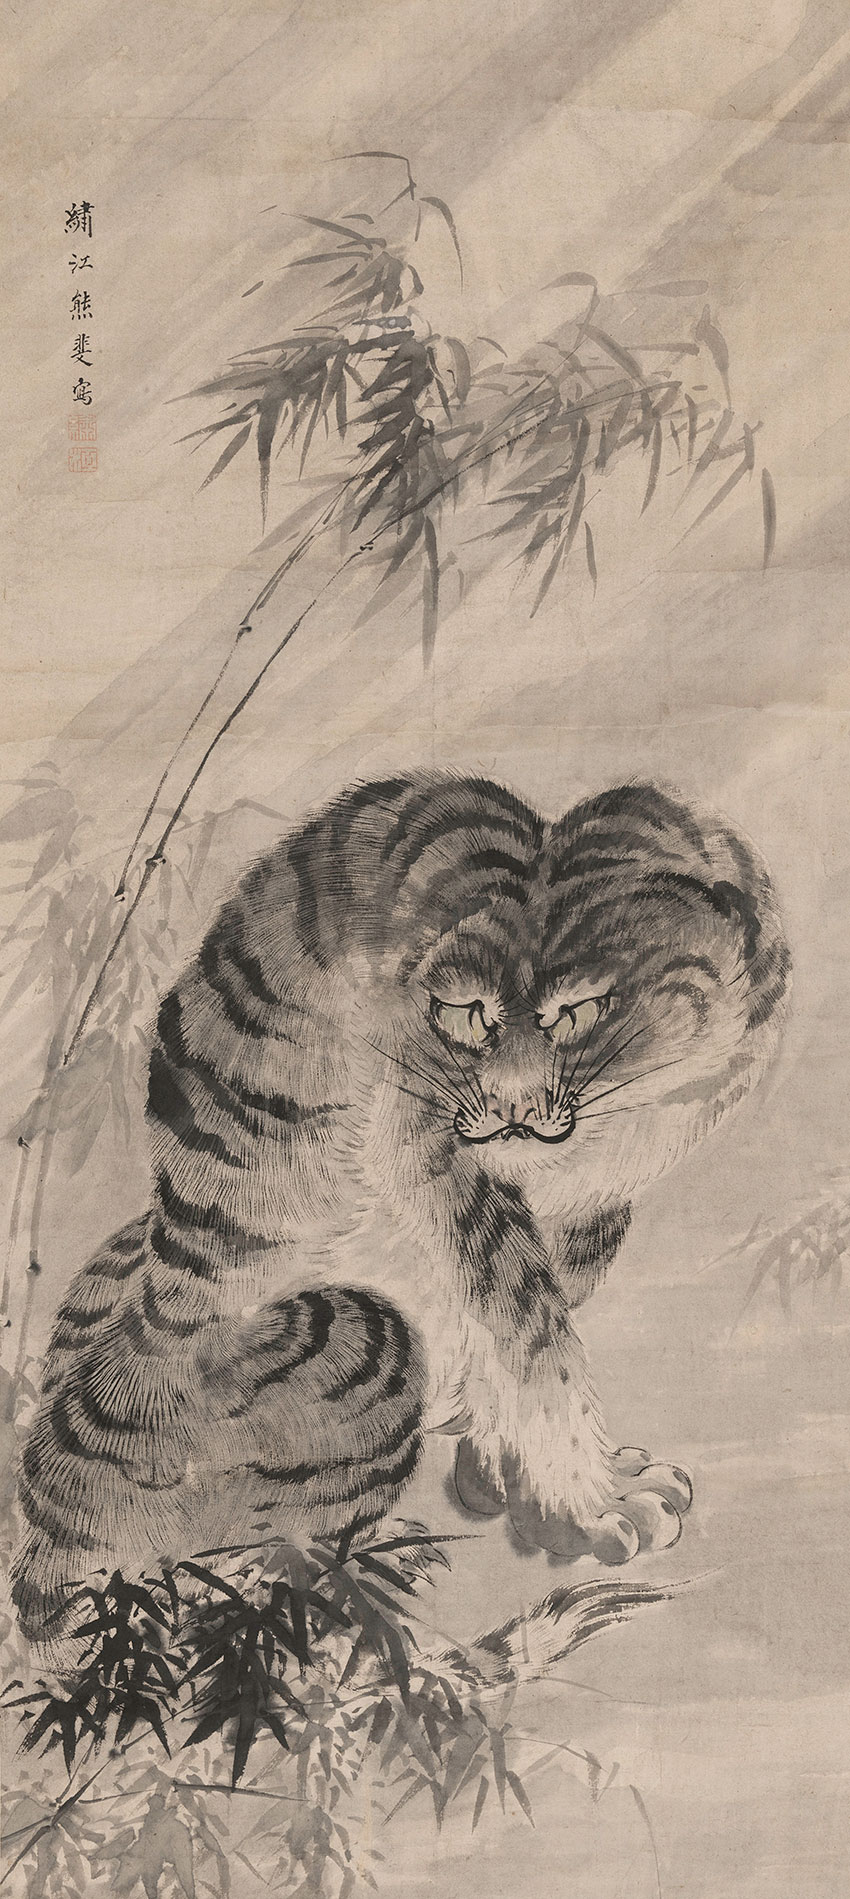 Kumashiro Yūhi. Nagasaki, 1693 or 1713-1772. A tiger among bamboo grass, Mid-18th century. Painting in ink on paper, 108,6 x 48,3 cm_RET